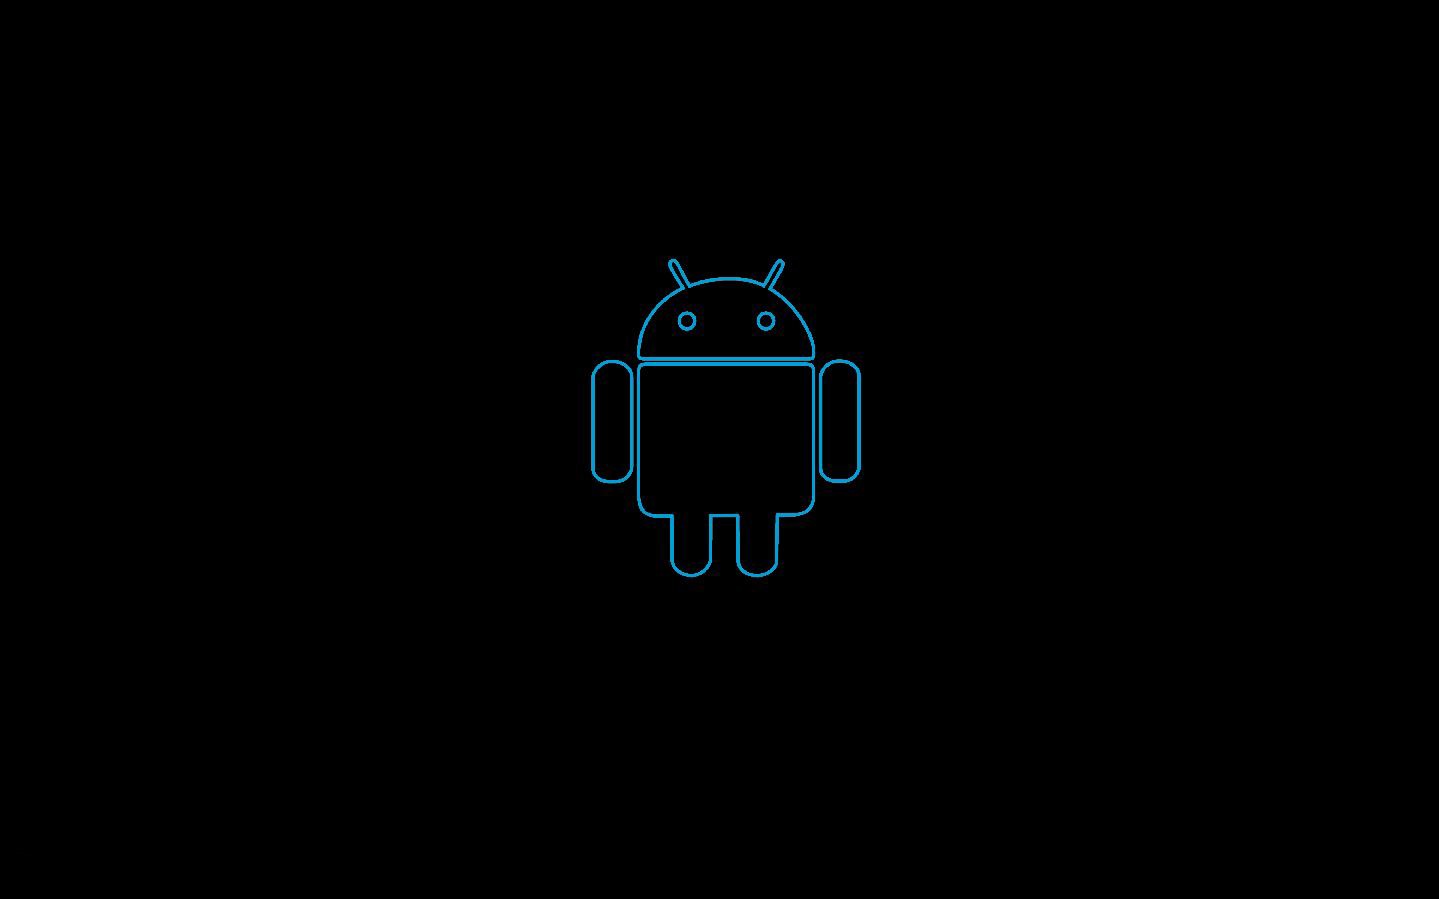 Black Hd Android Wallpapers